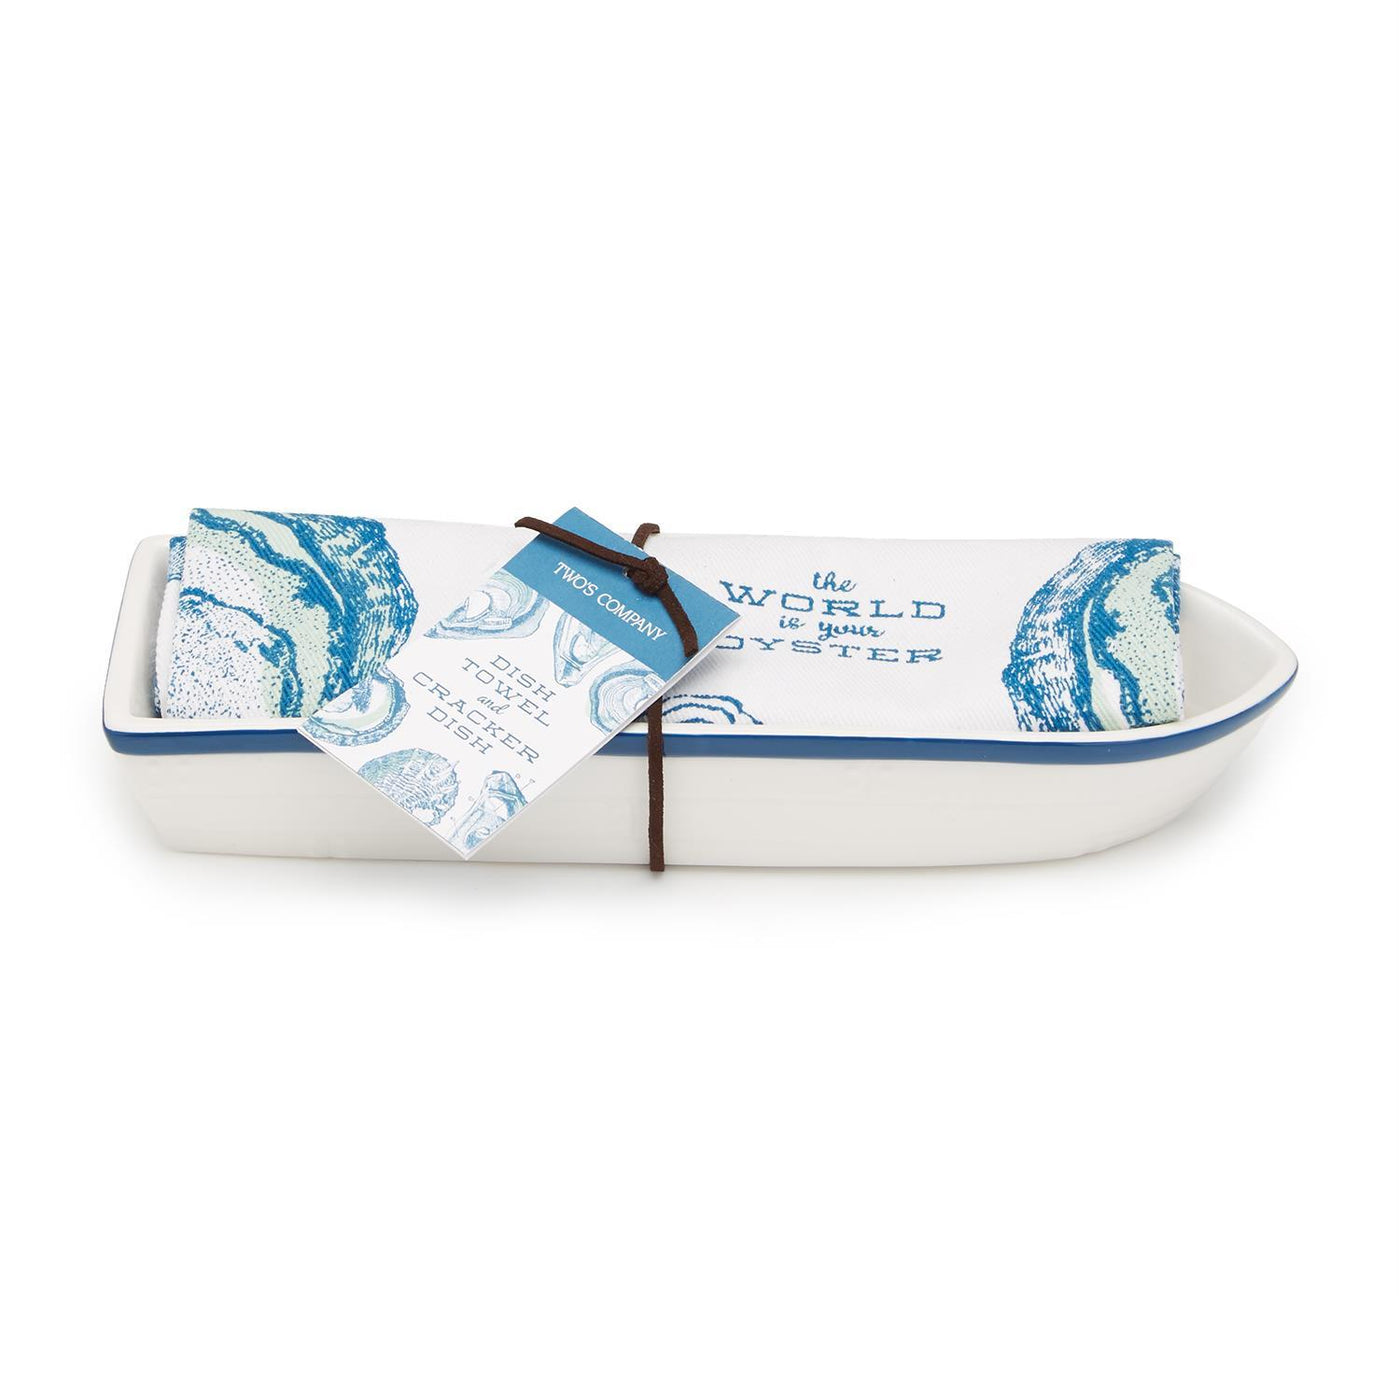 Oyster Dish Towel & Bowl Set-HOME/GIFTWARE-Kevin's Fine Outdoor Gear & Apparel